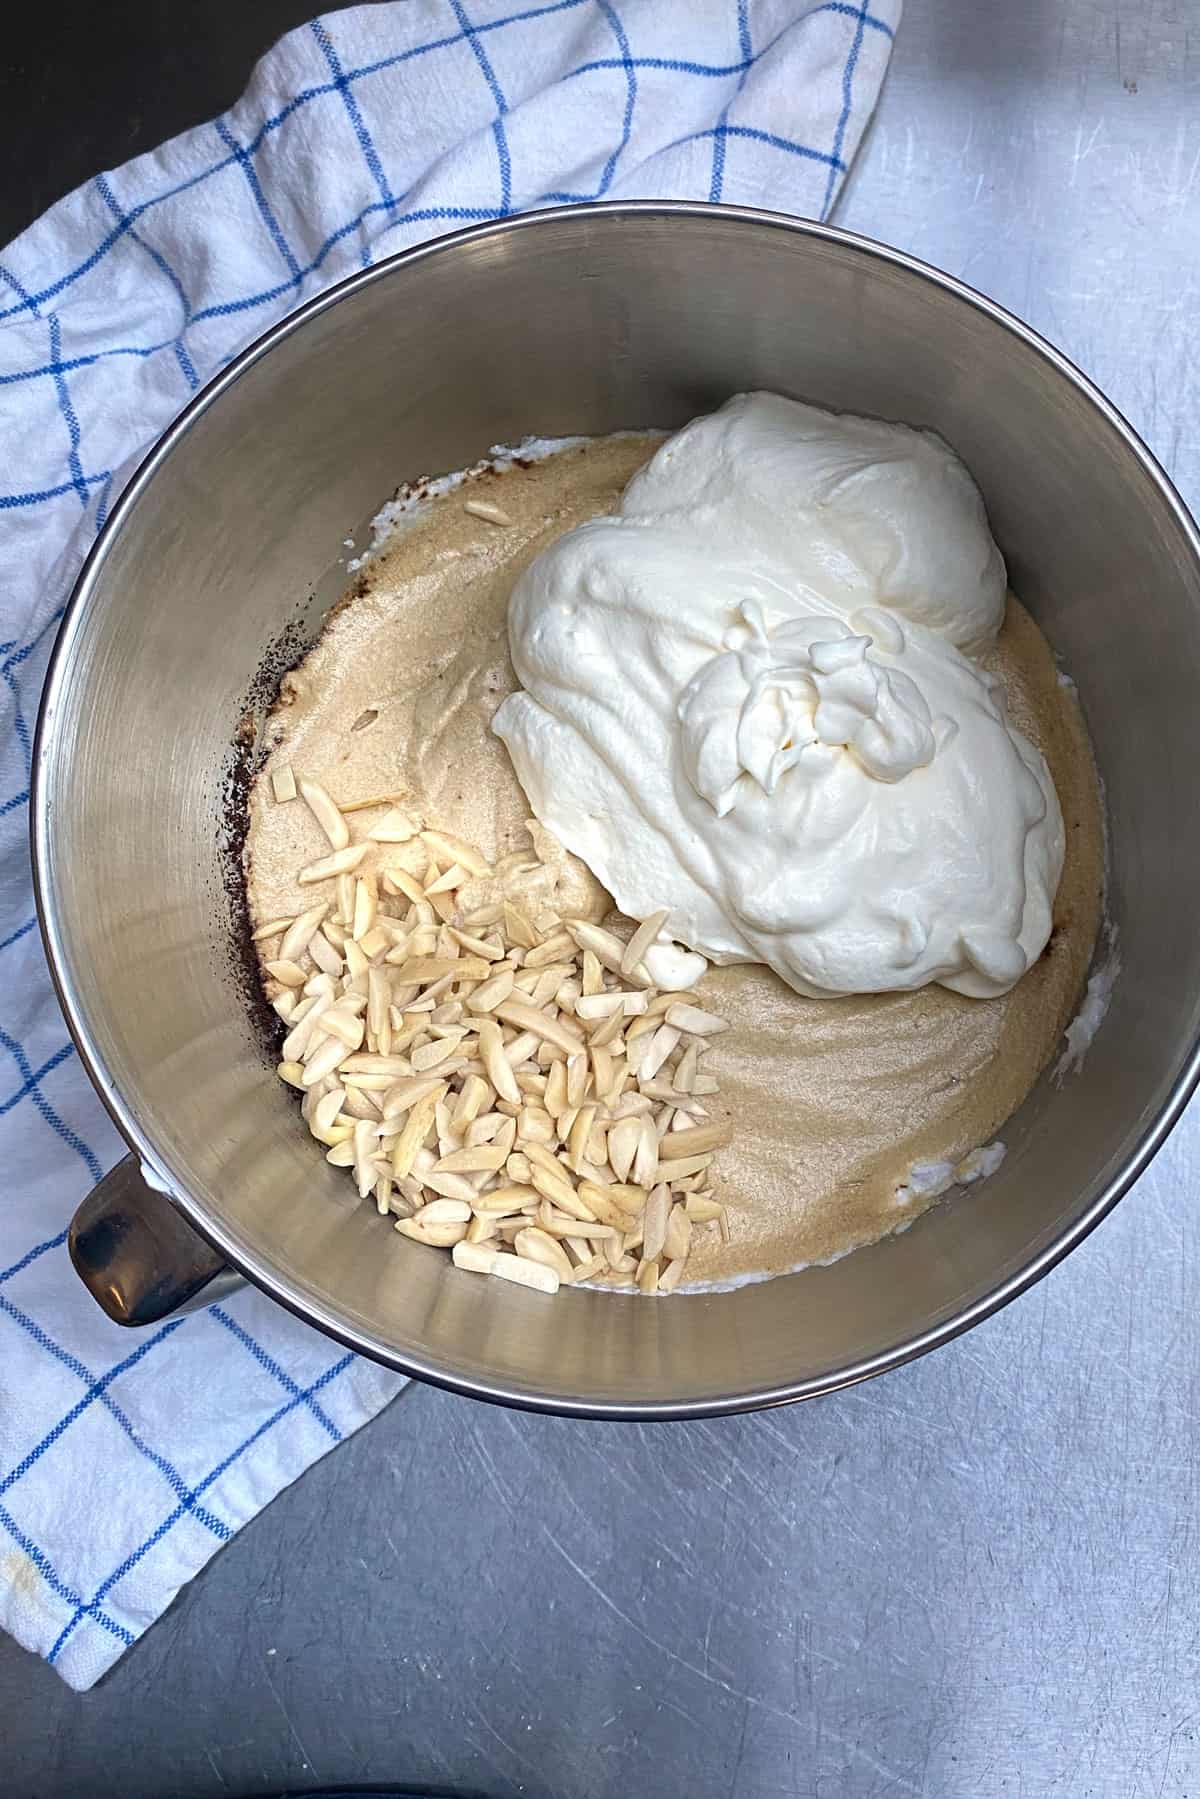 mocha filling in a metal bowl topped with whipped cream and slivered almonds